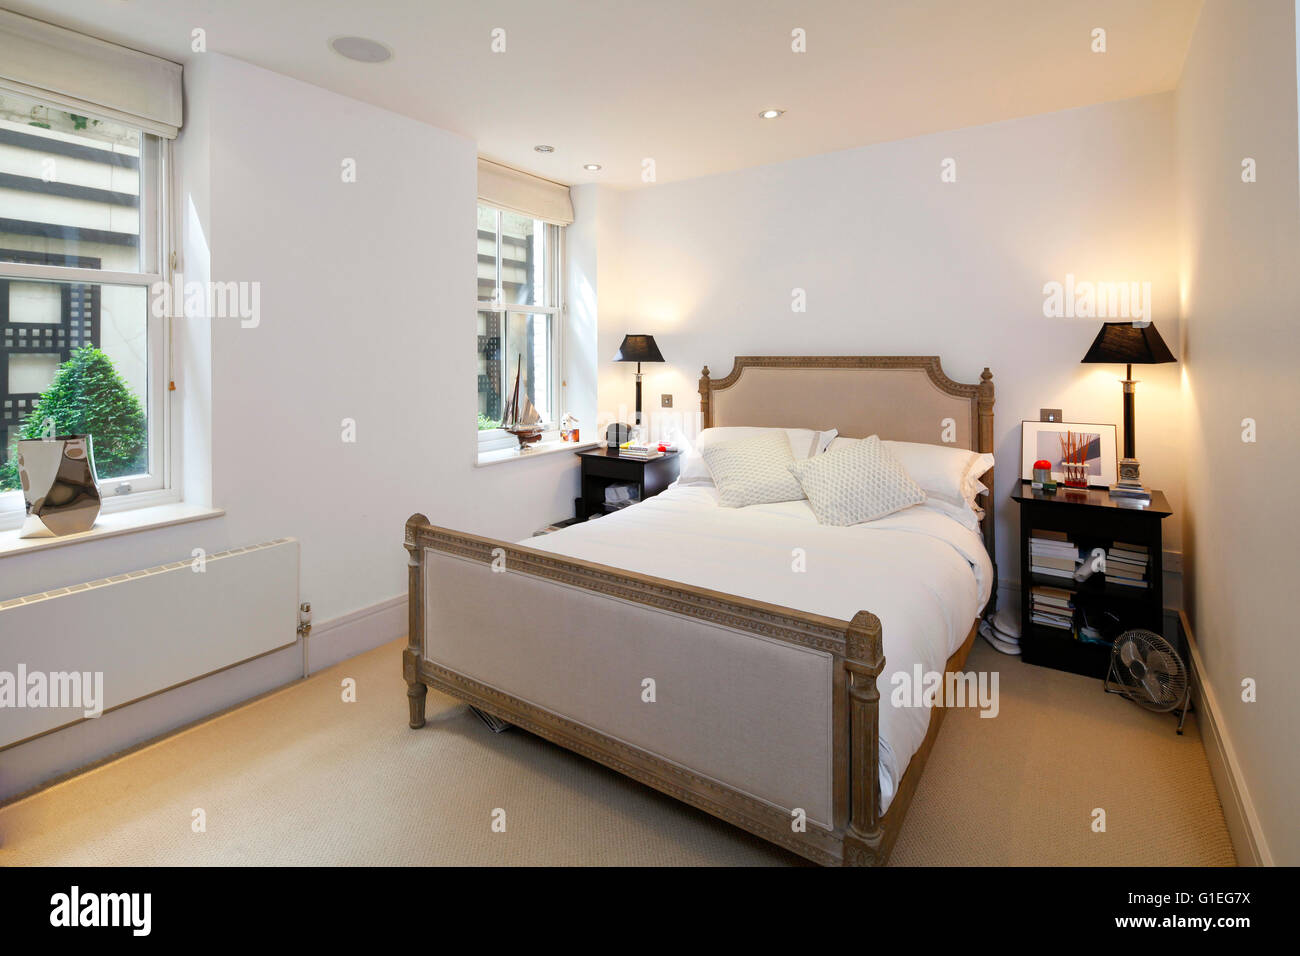 Bedford Gardens, Kensington. Bedroom with white walls and wood floors. Traditional furniture. Stock Photo